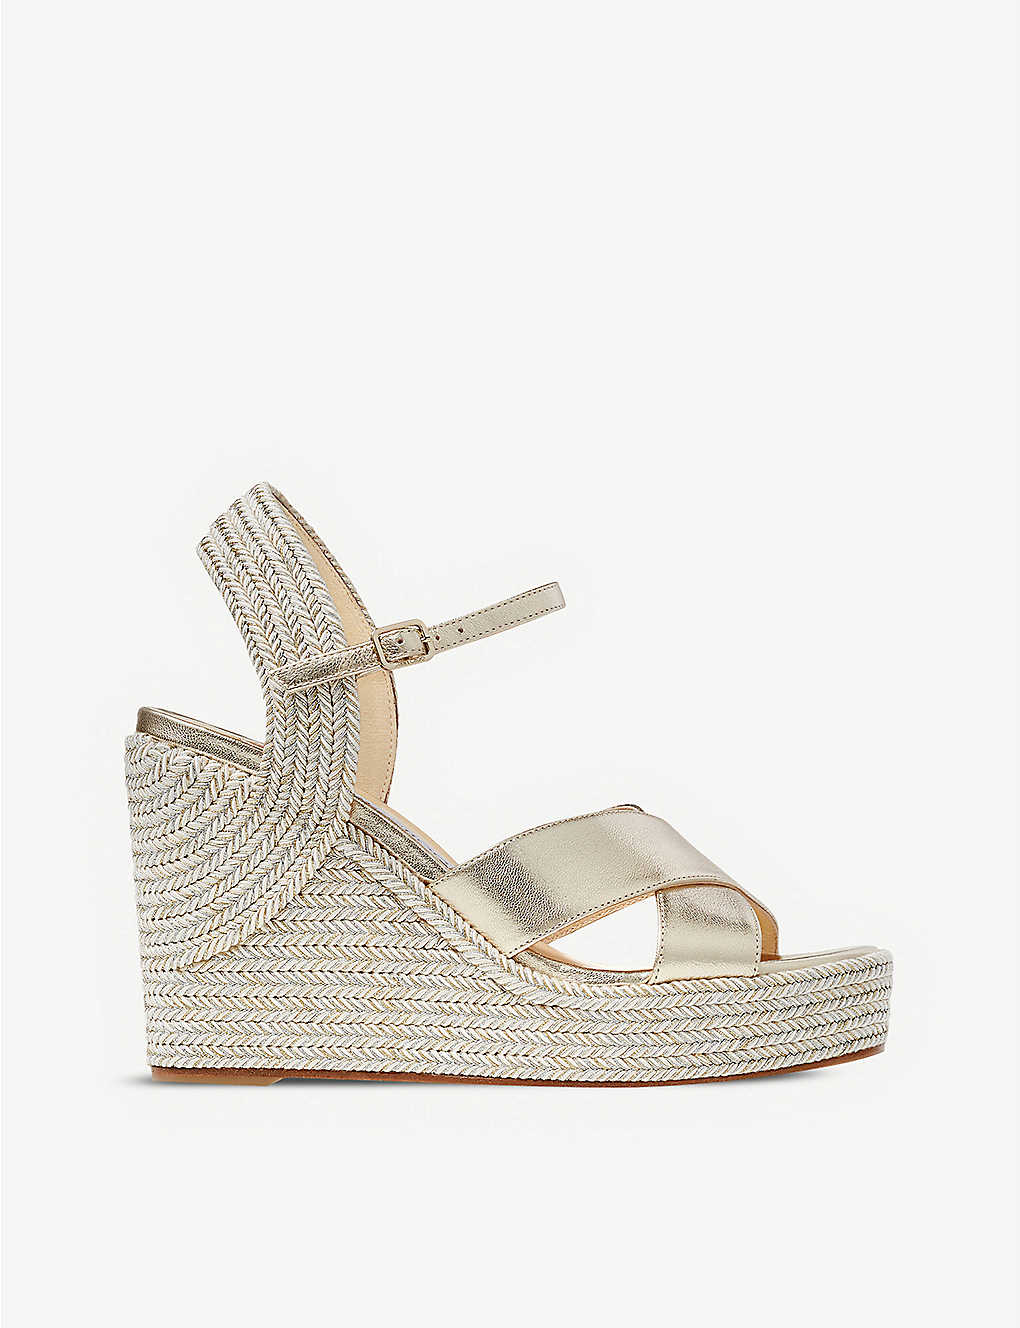 Shop Jimmy Choo Dellena 100 Leather Wedge Sandals In Champagne/champagne